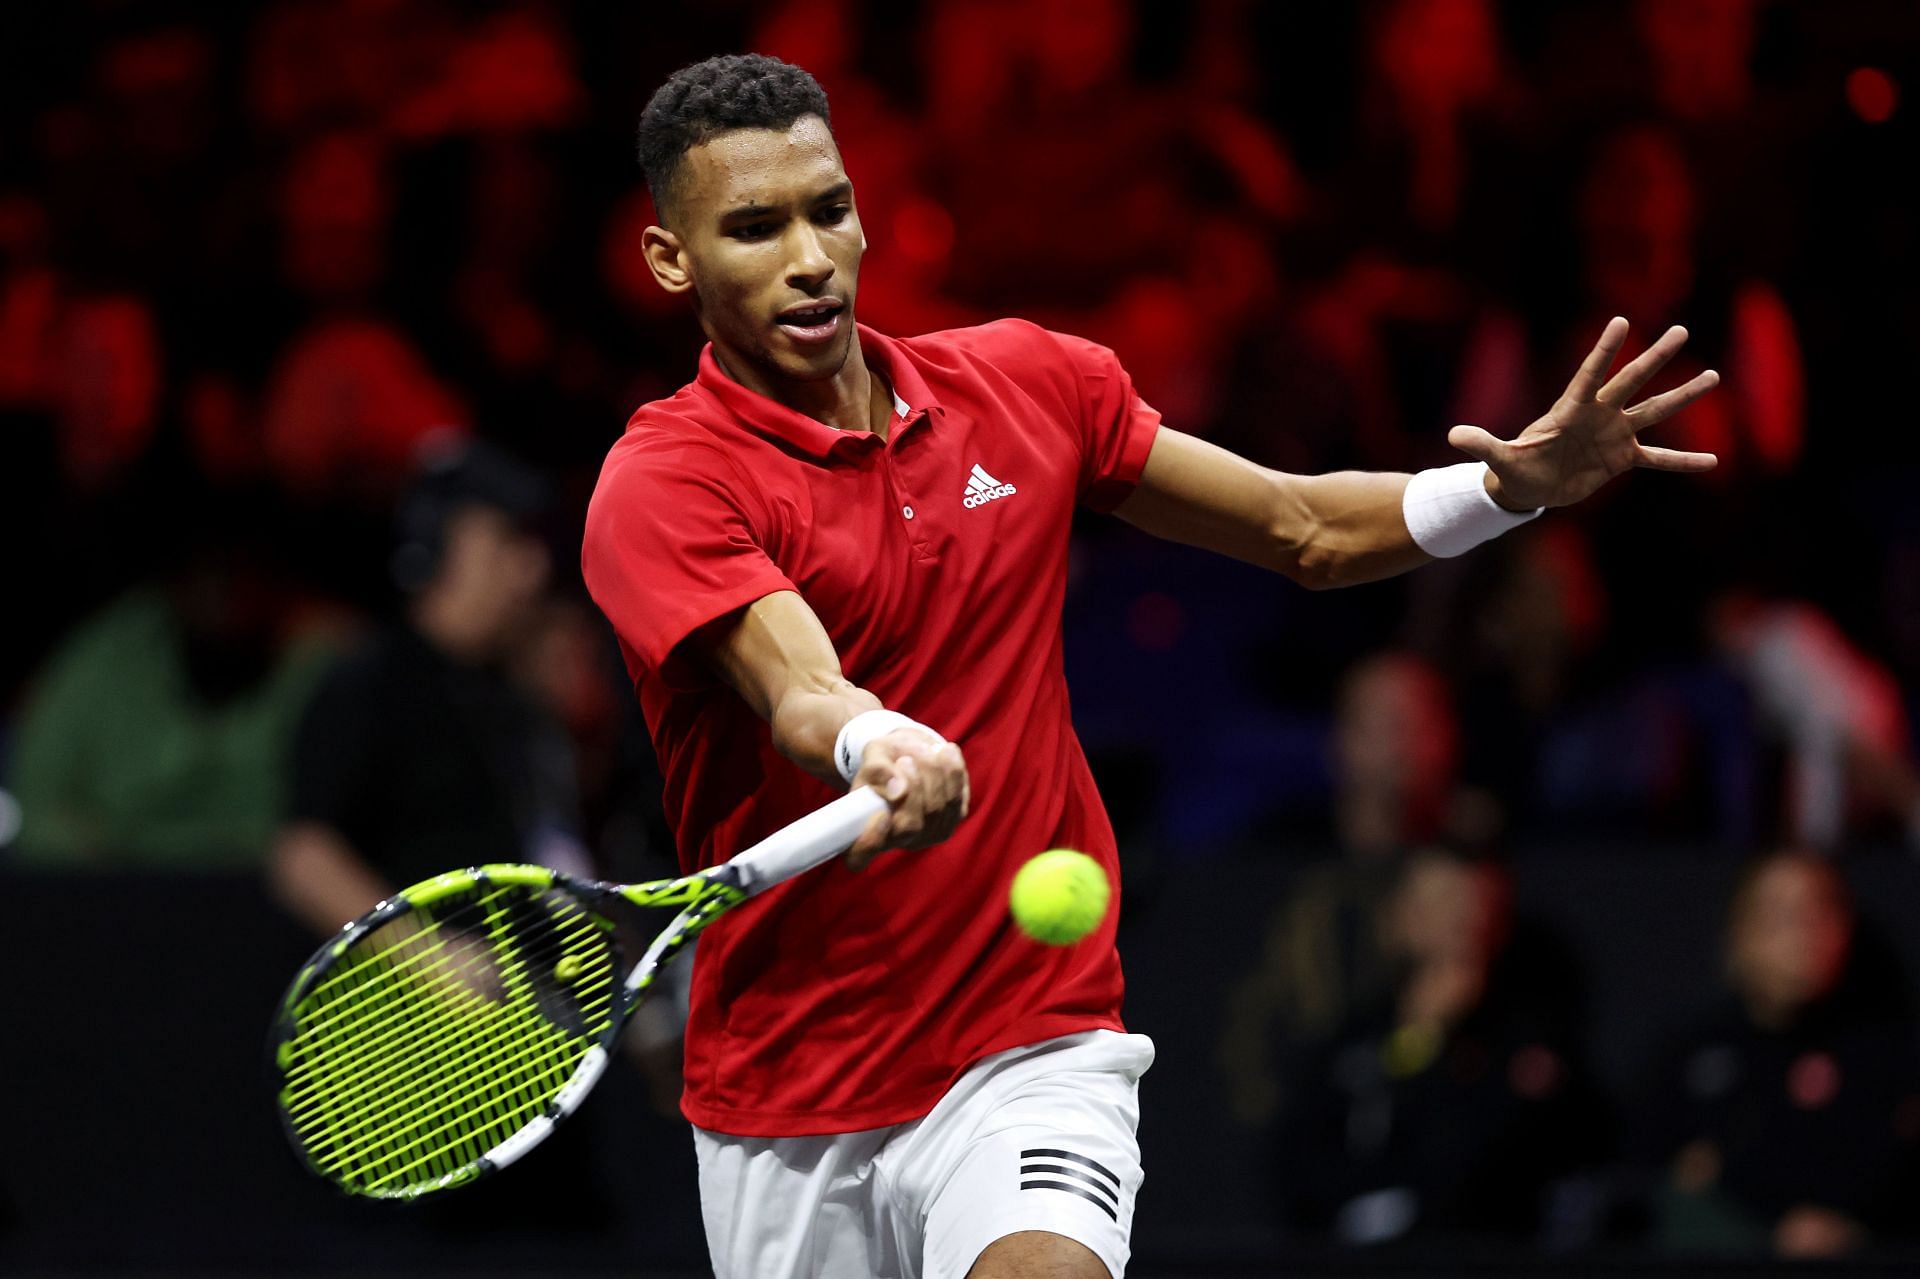 Felix Auger-Aliassime will aim to win his second title of 2022